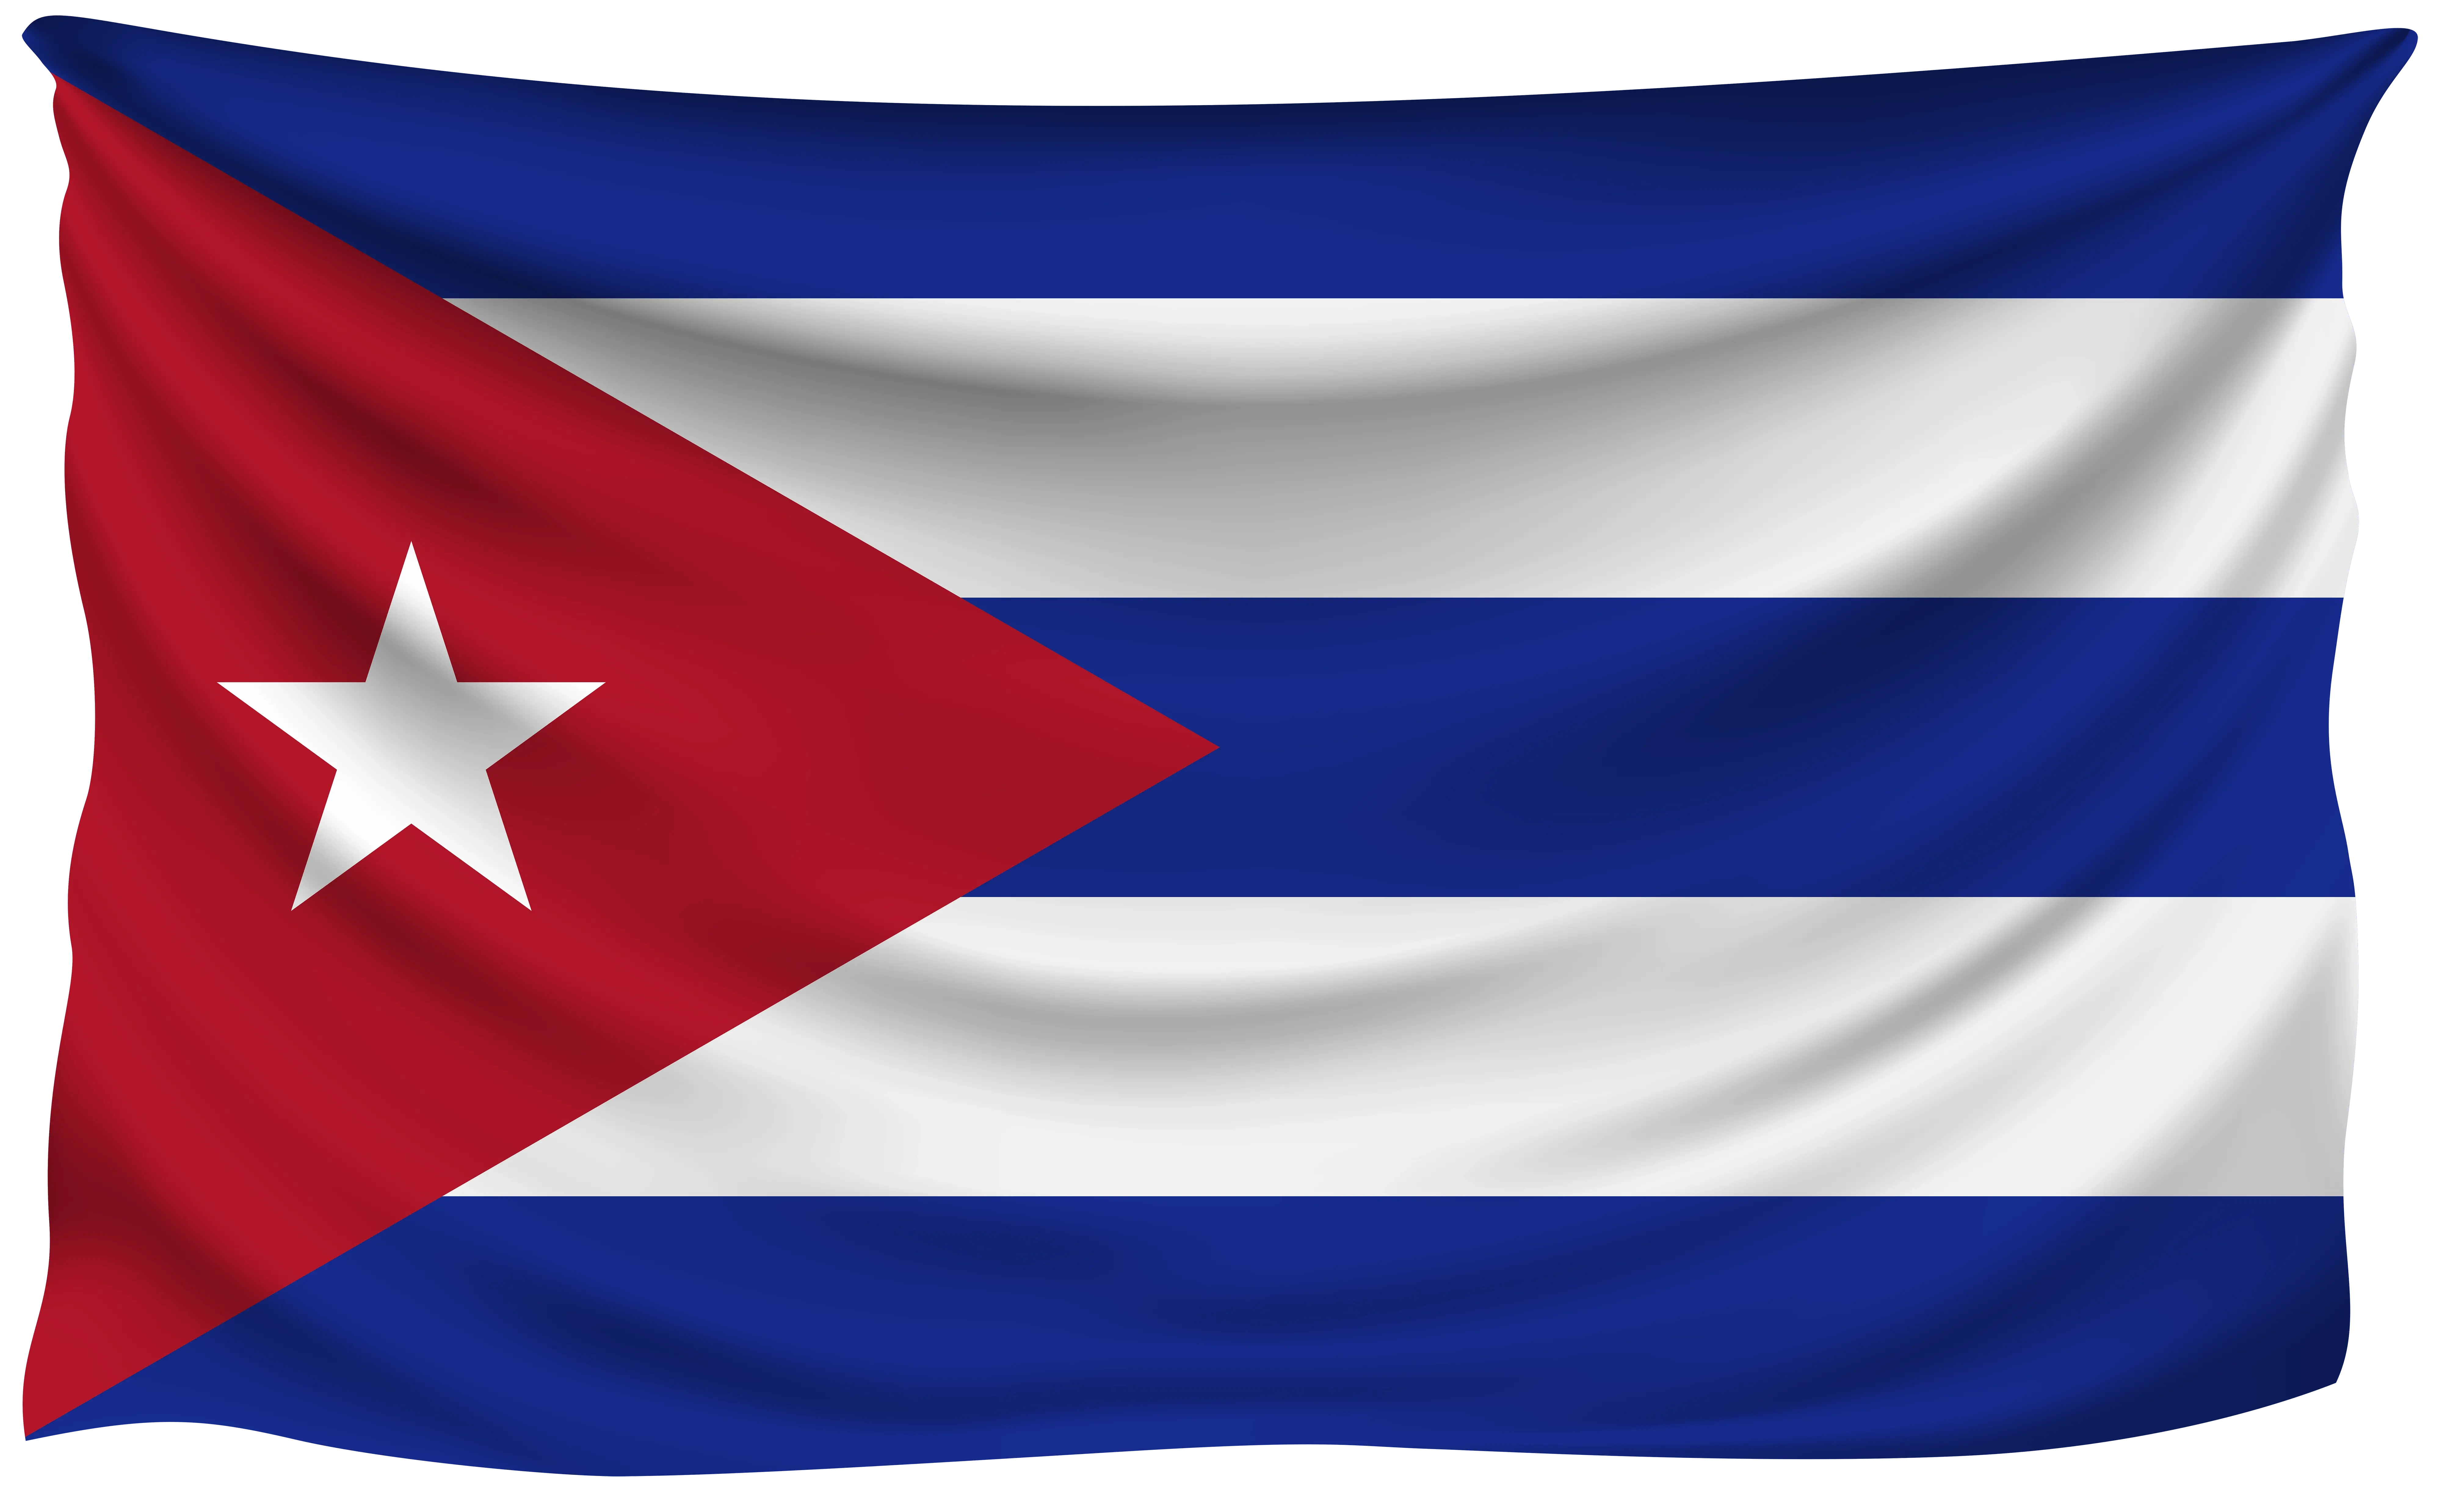 Cuban Flag No Background Png Image Red White And Blue Flags With One Star Cuban Flag Png